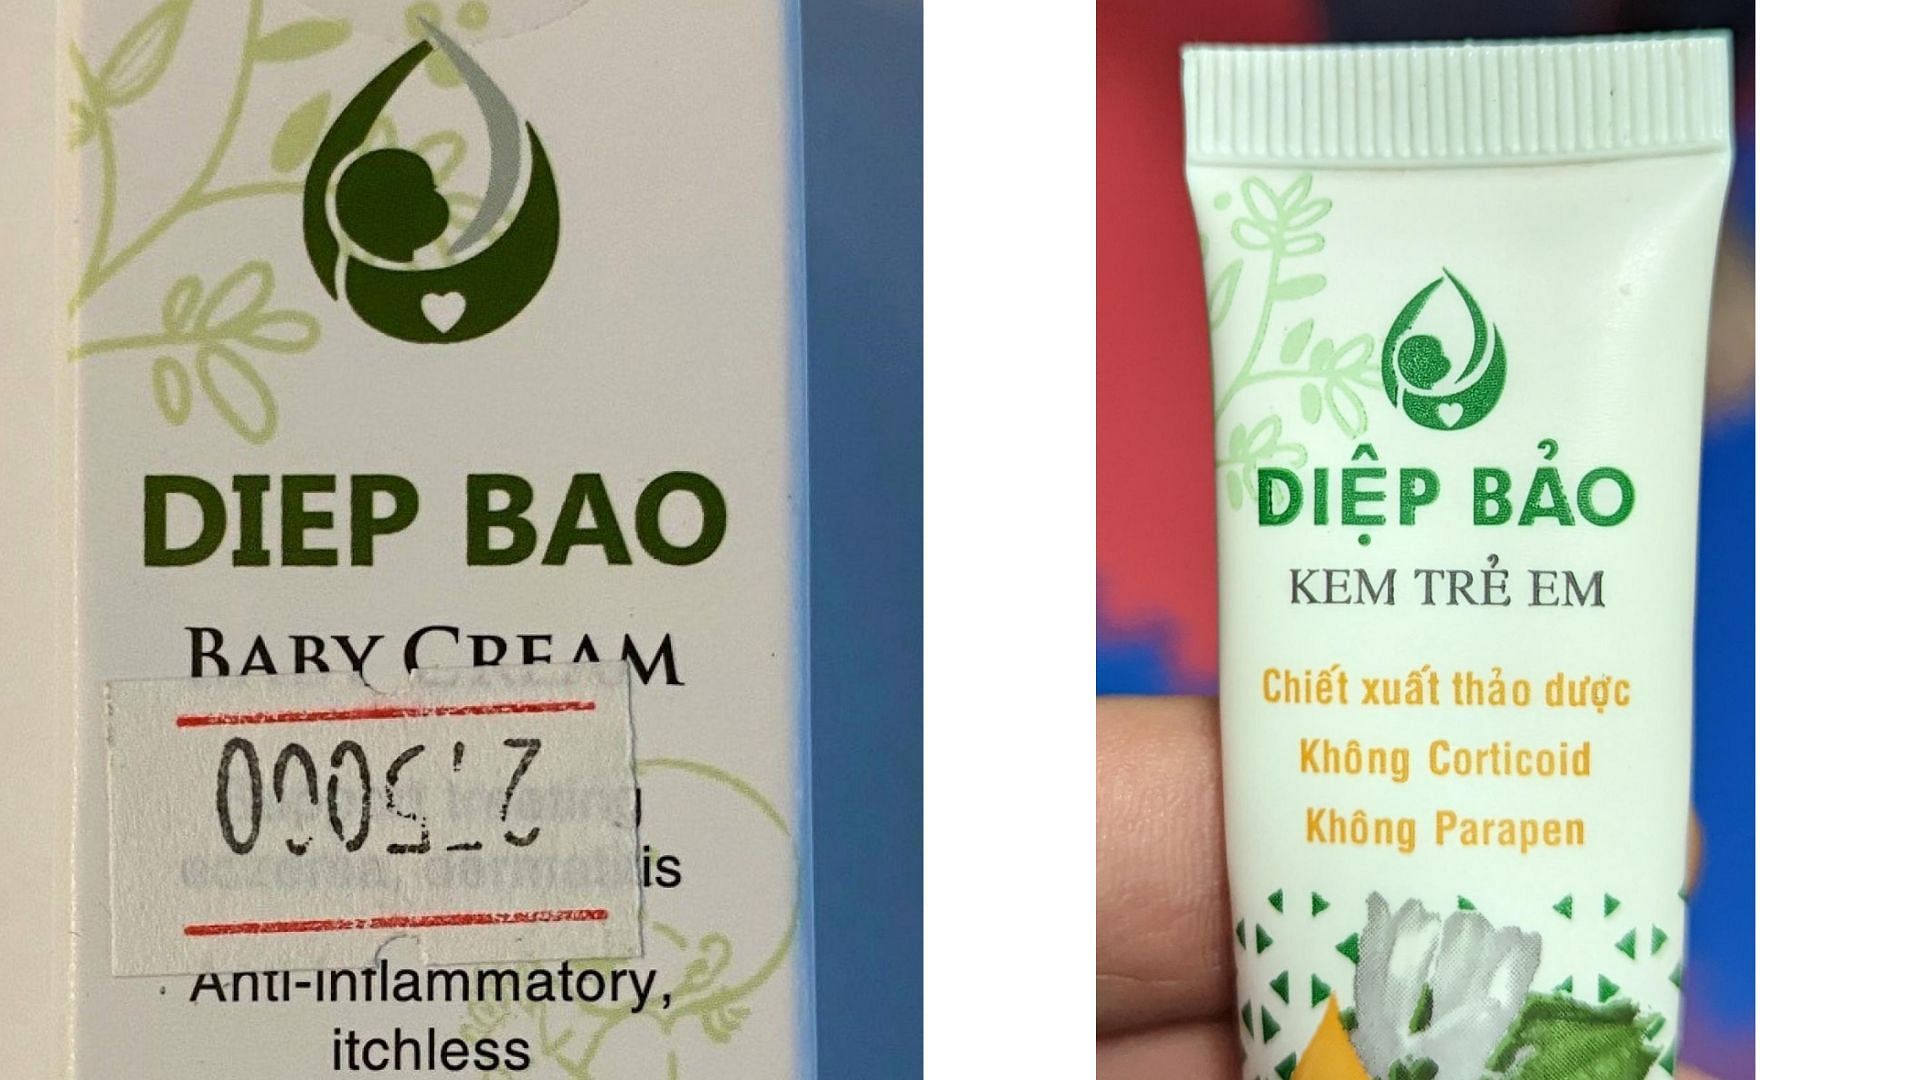 Usage of Diep Bao Cream can result in high exposure to lead (Image via FDA)